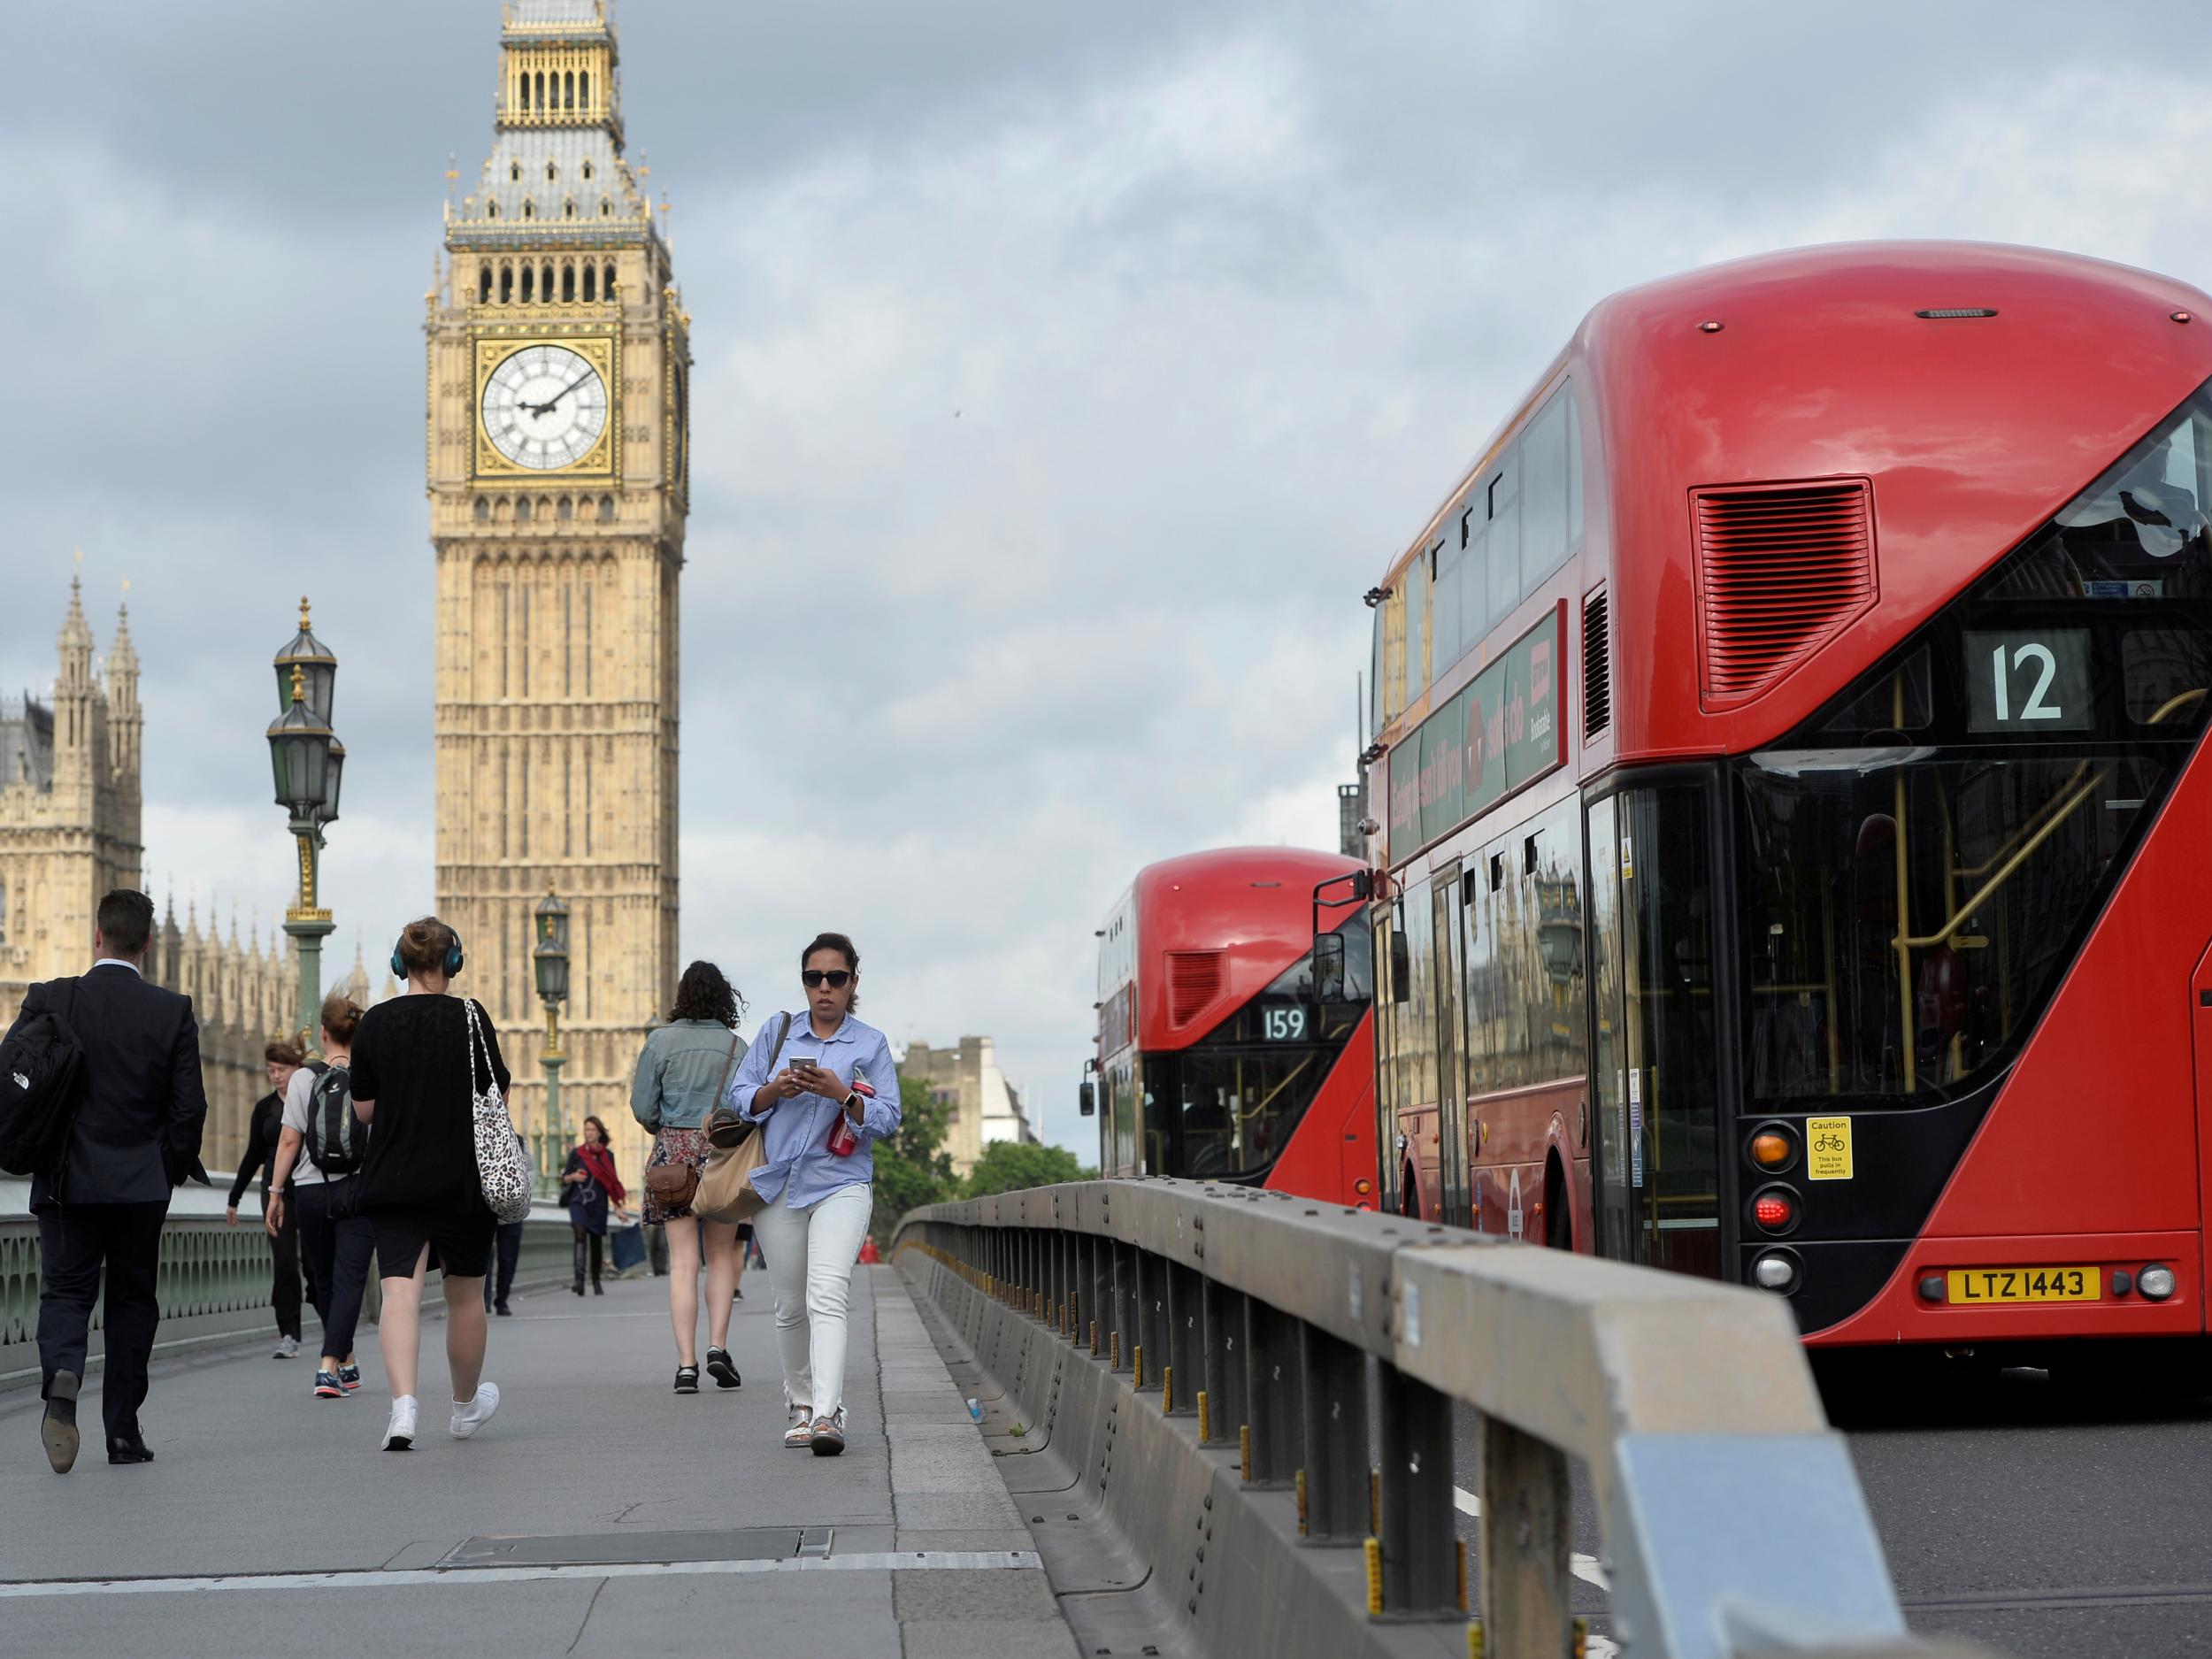 New barriers have been installed on Westminster Bridge, where 52-year-old Khalid Masood drove a car into pedestrians on 22 March